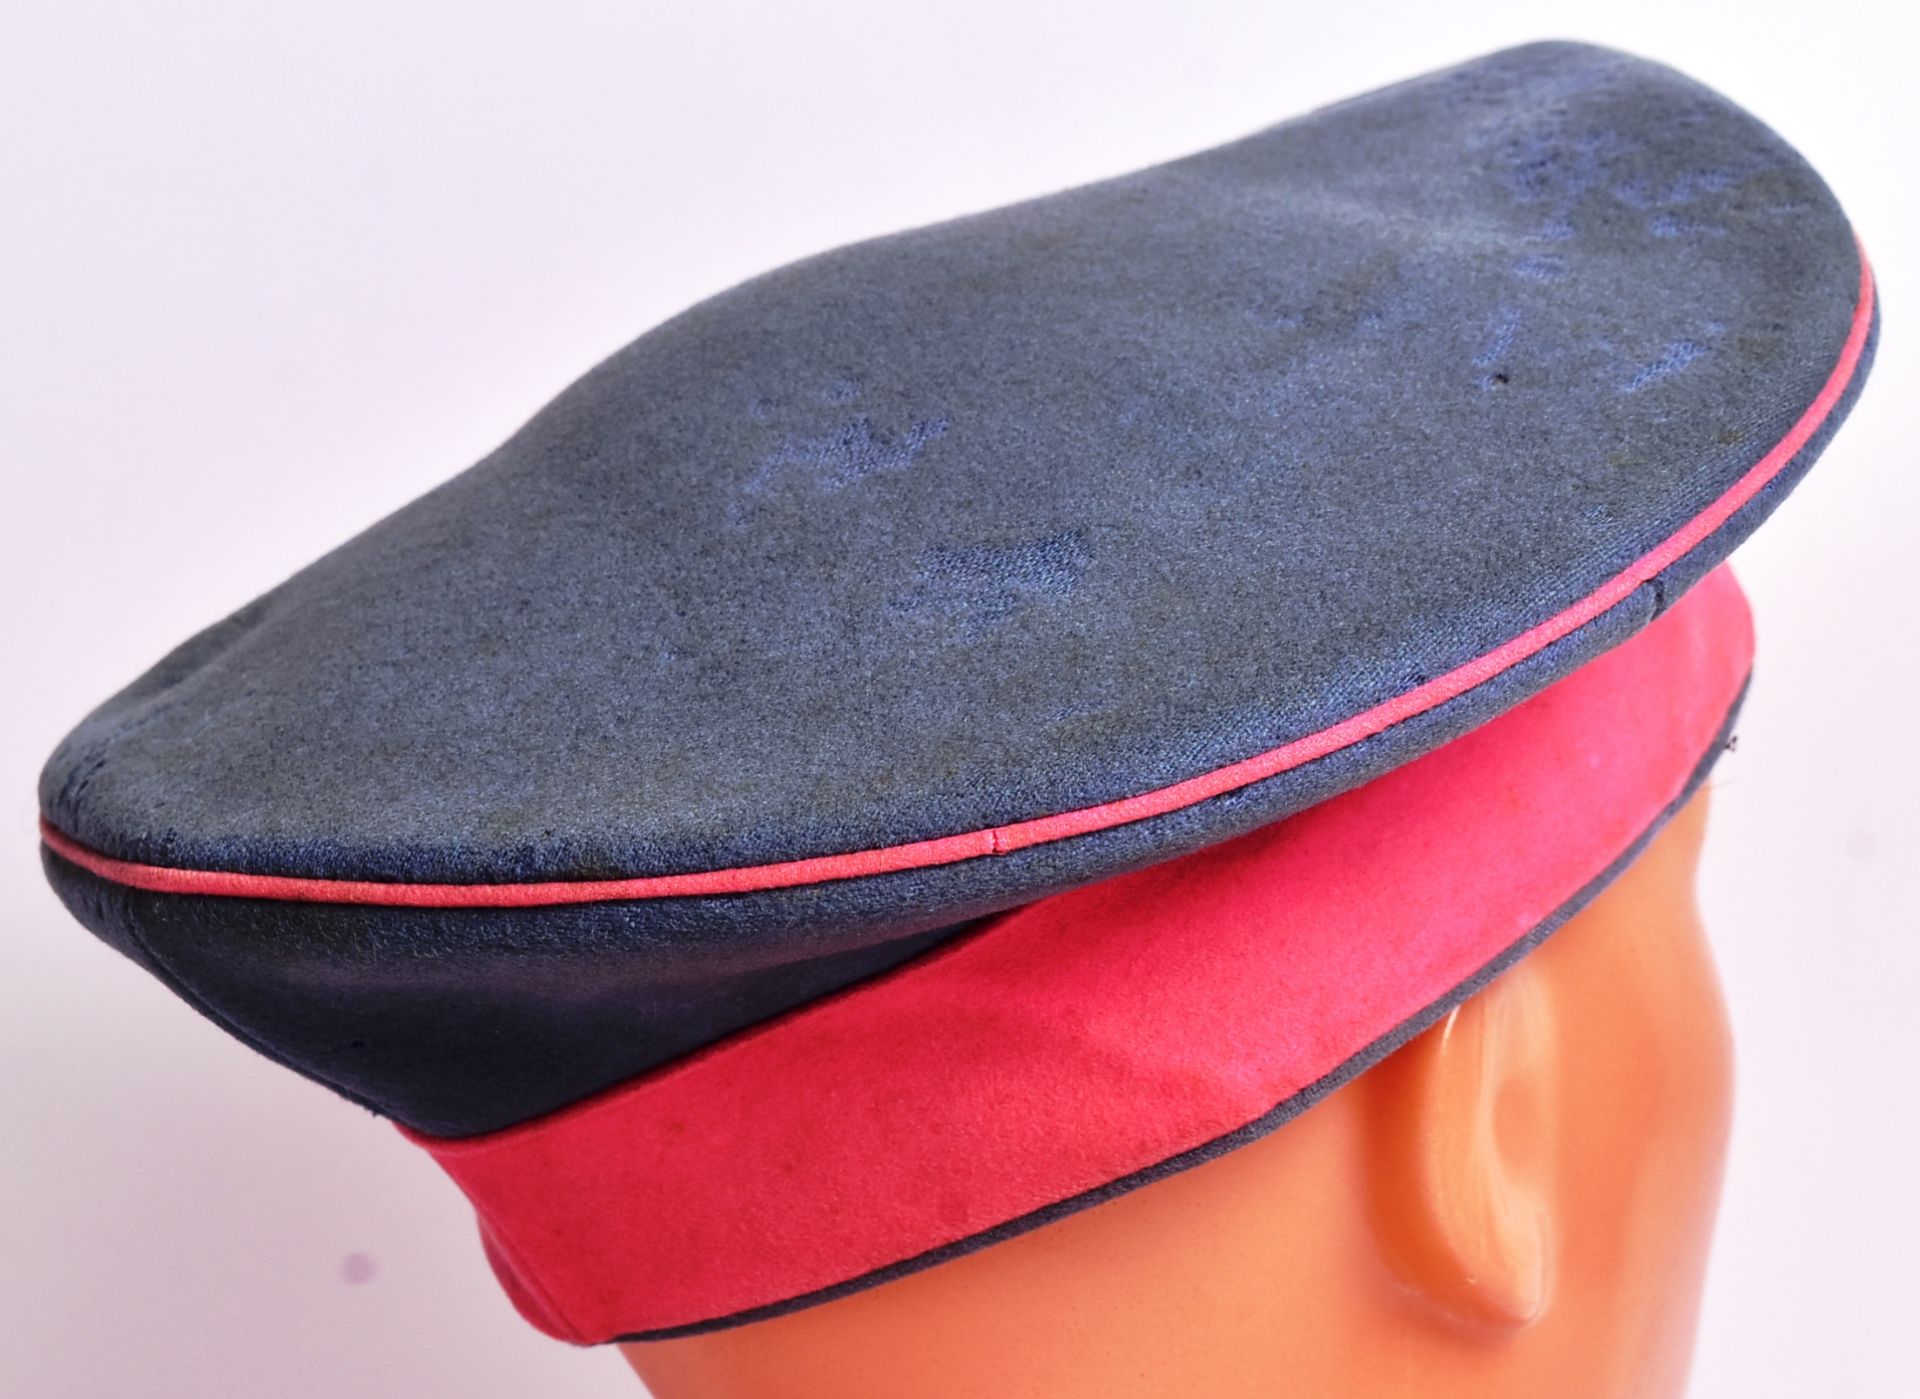 WWI FIRST WORLD WAR IMPERIAL GERMAN / PRUSSIAN INFANTRY CAP - Image 3 of 5